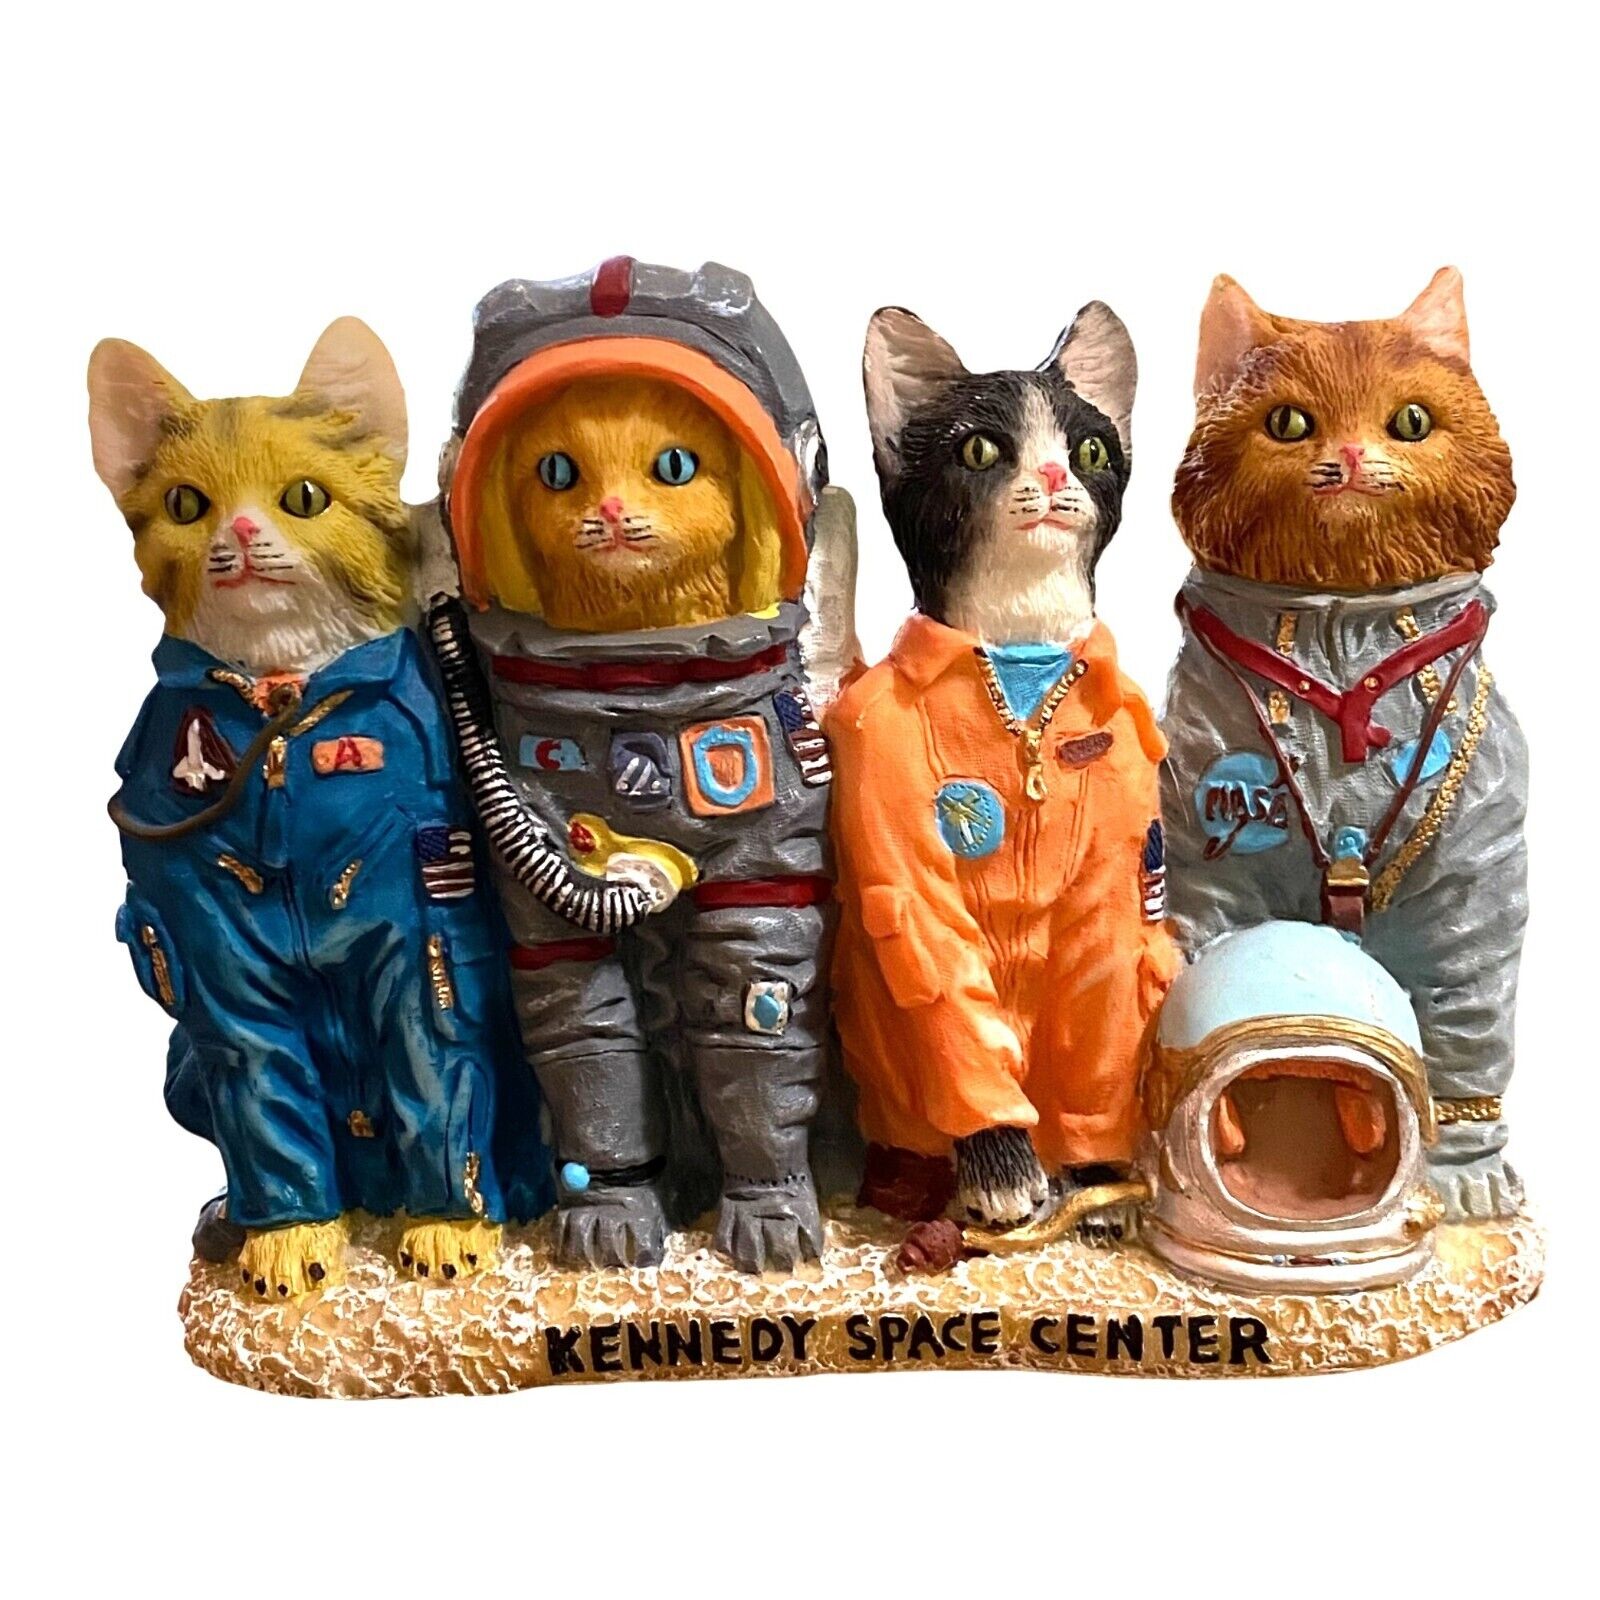 NASA Kennedy Space Center Astronaut Cats Figurine Prints of Tails